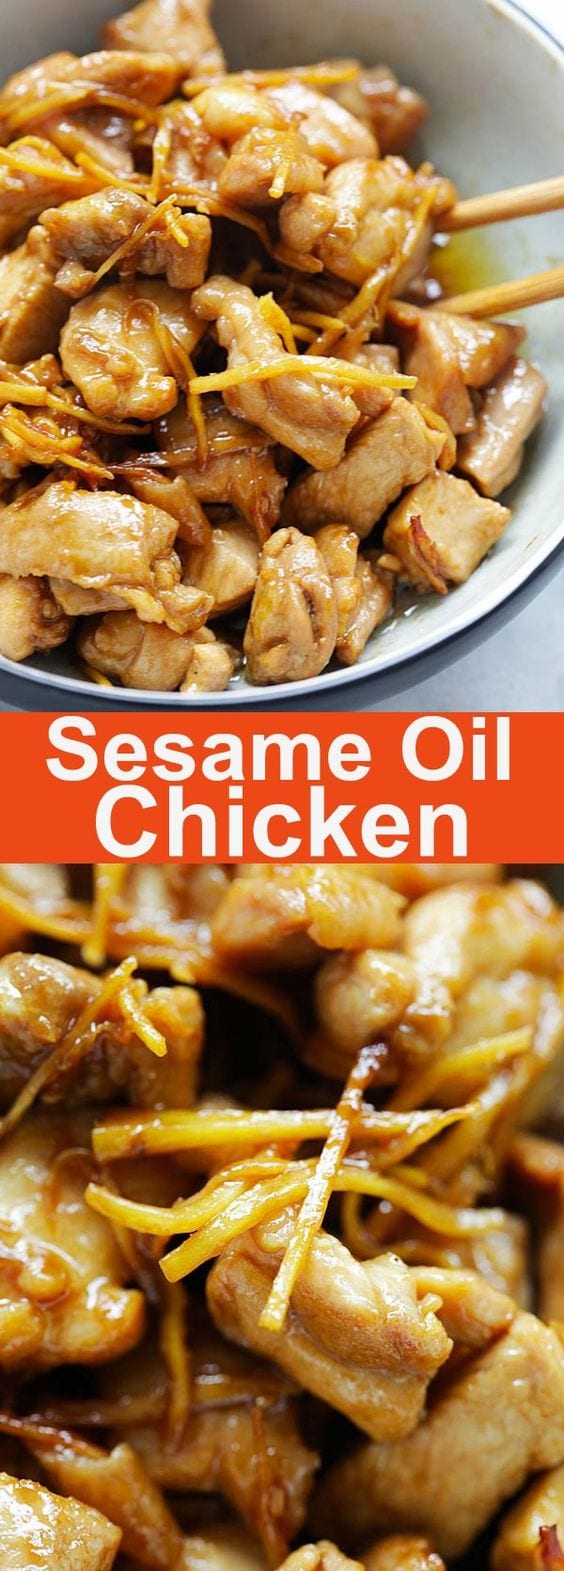 Sesame Oil Chicken (麻油鸡) recipe - This a really homey and humble chicken dish that is both delicious and easy to make. It takes only a few ingredients, and the great taste complements steamed white rice. | rasamalaysia.com